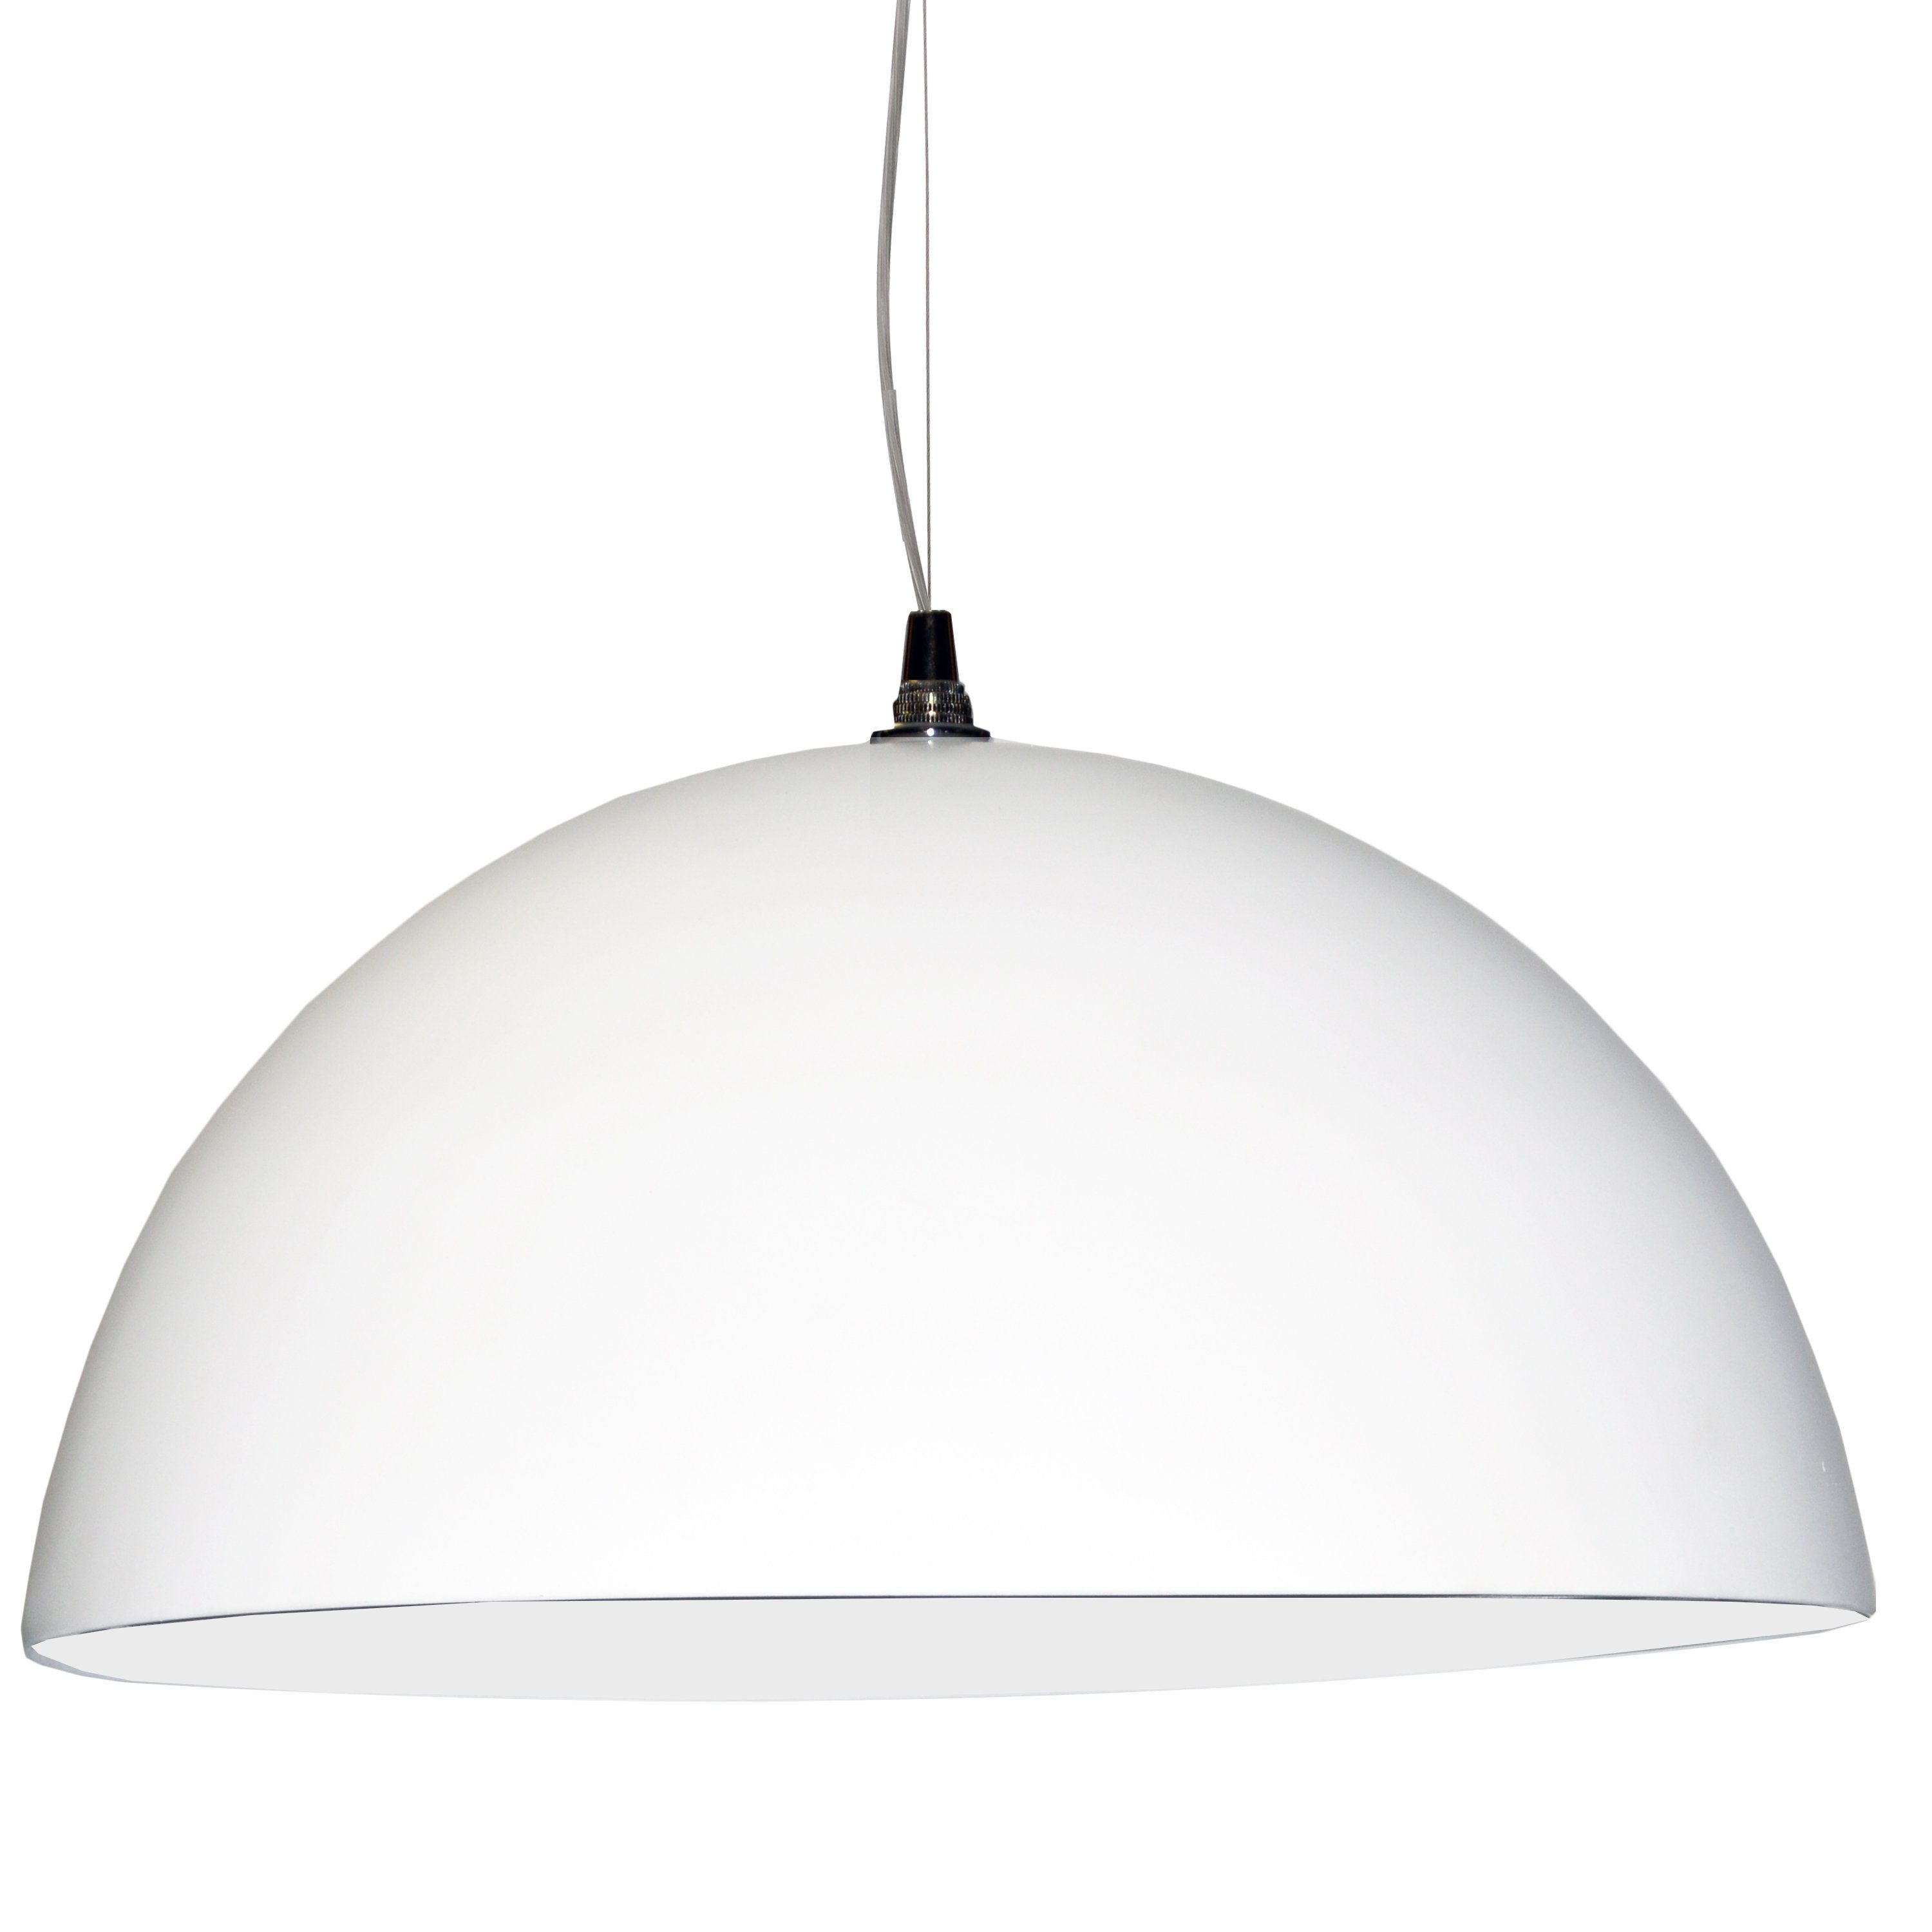 Ivy Bronx Oklee 3 Light Dome Pendant For Granville 3 Light Single Dome Pendants (View 30 of 30)